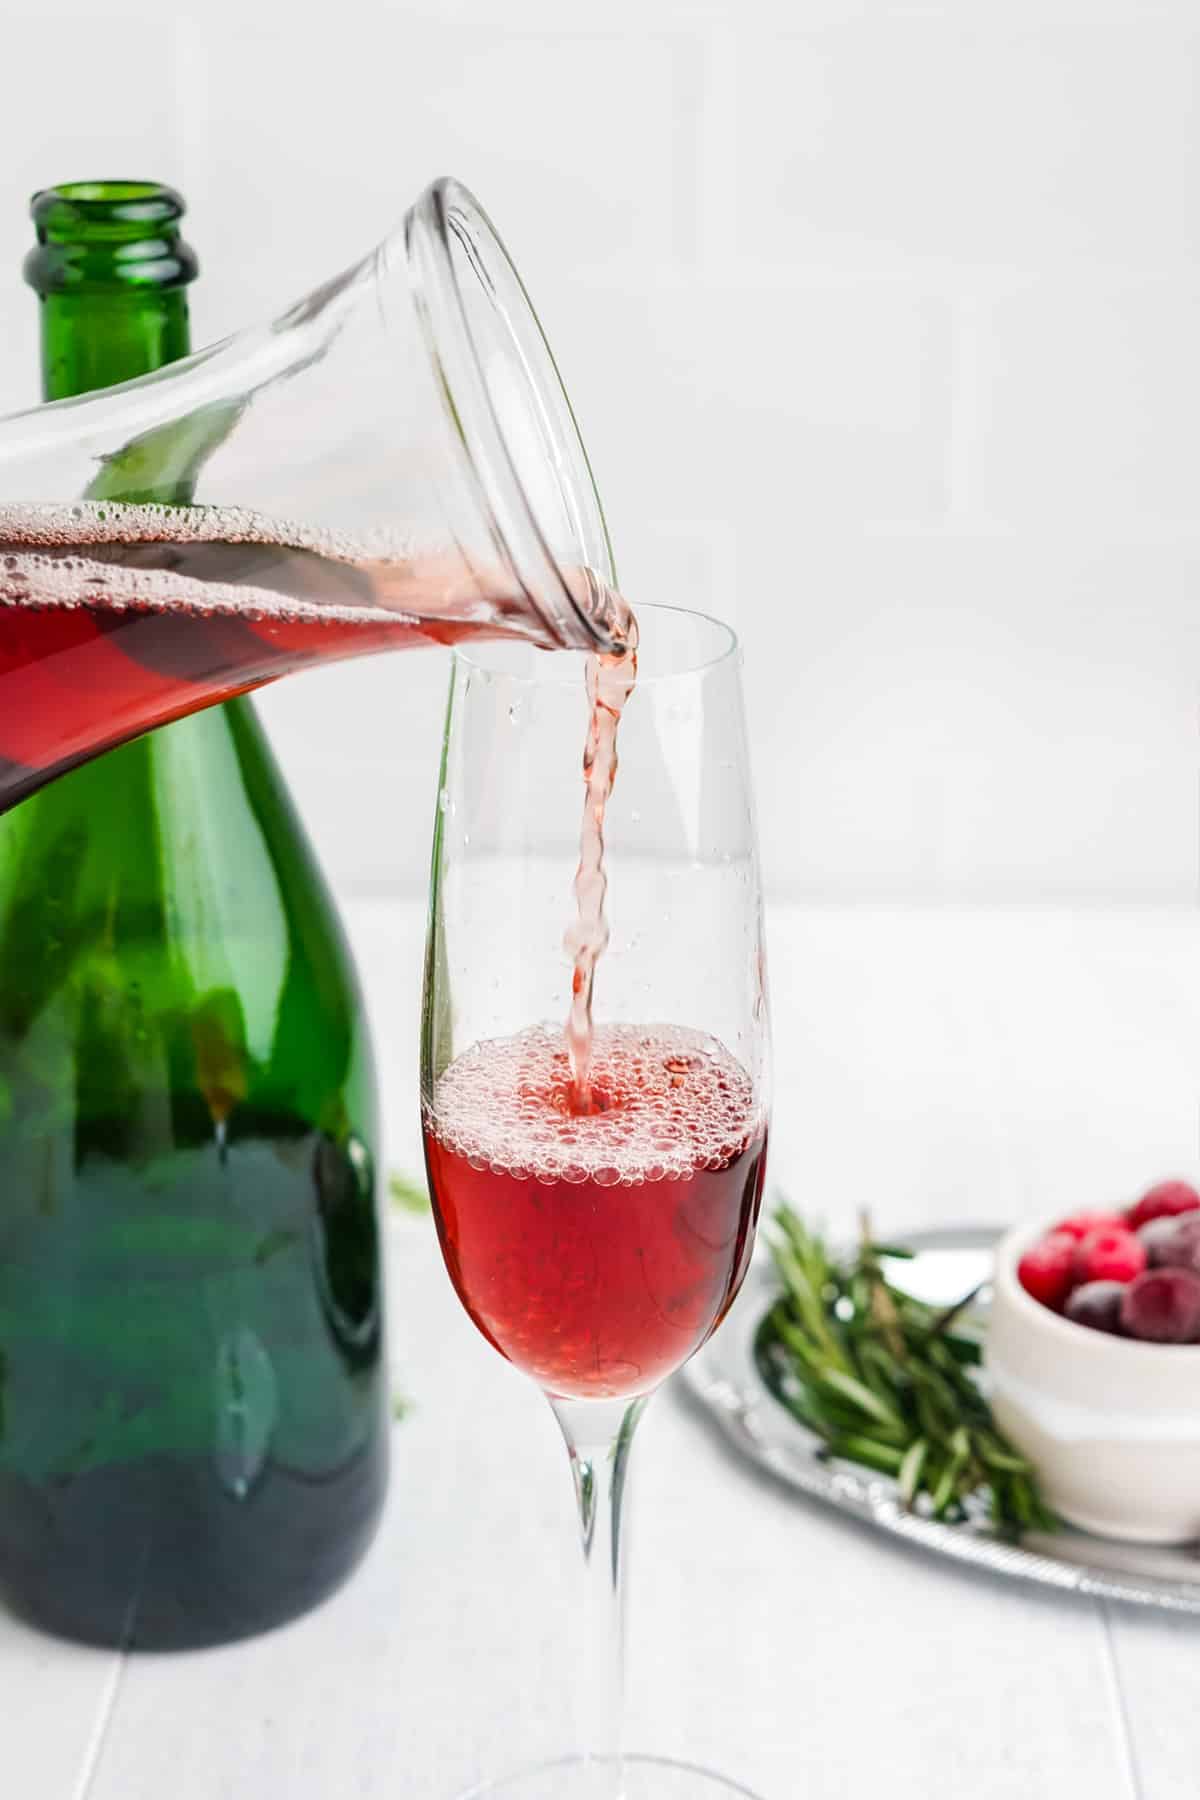 Pouring the cranberry juice in a glass.